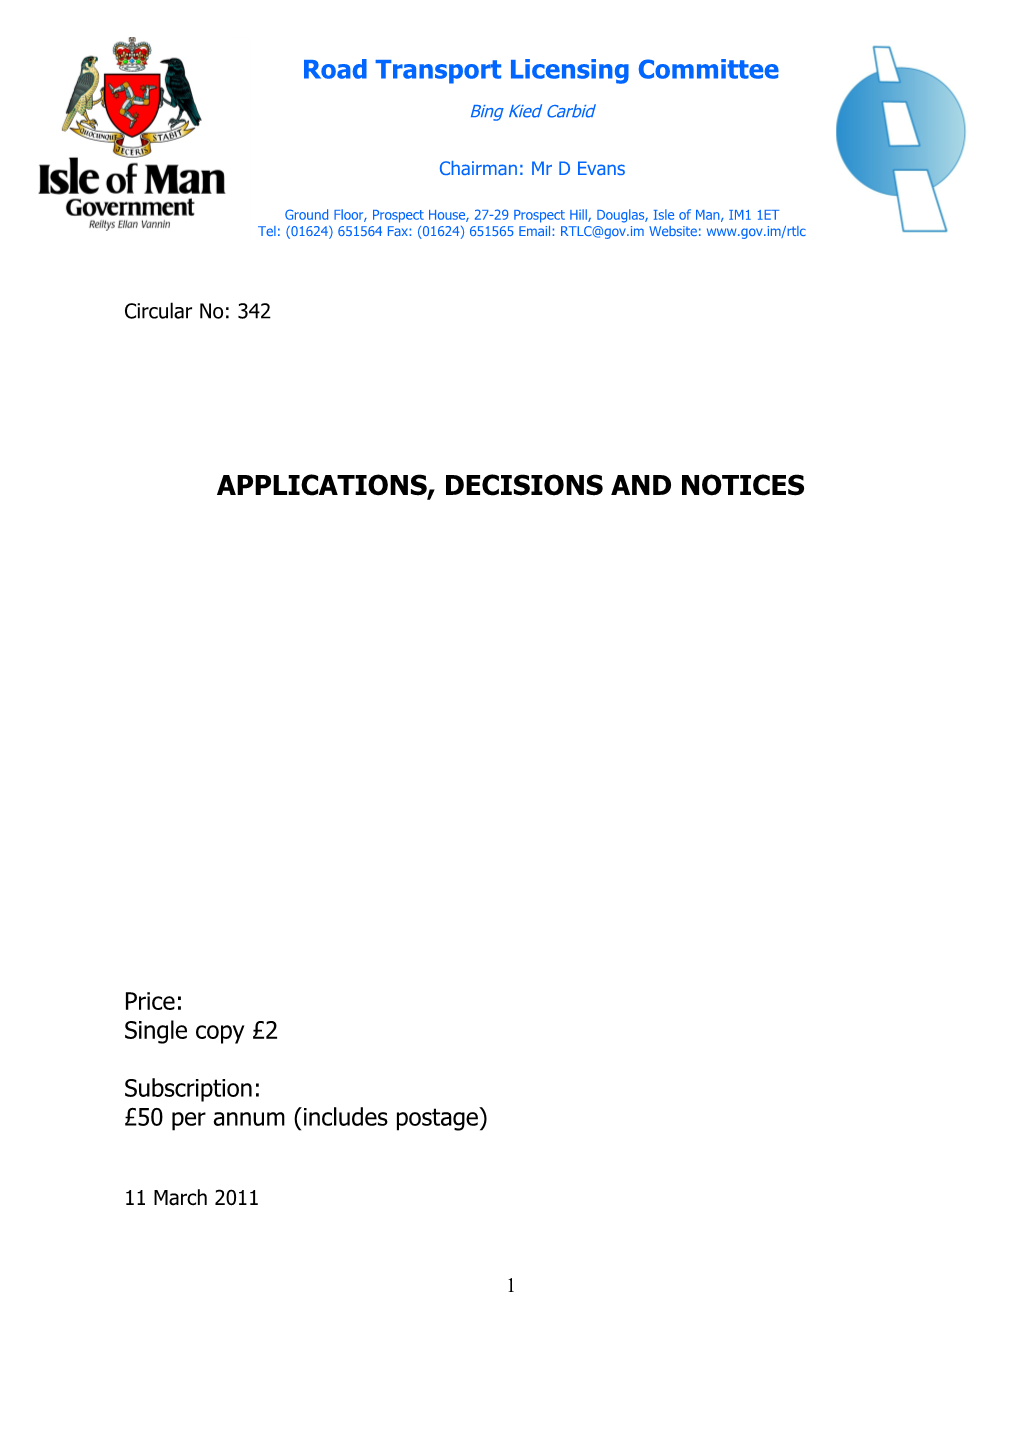 Applications, Decisions and Notices